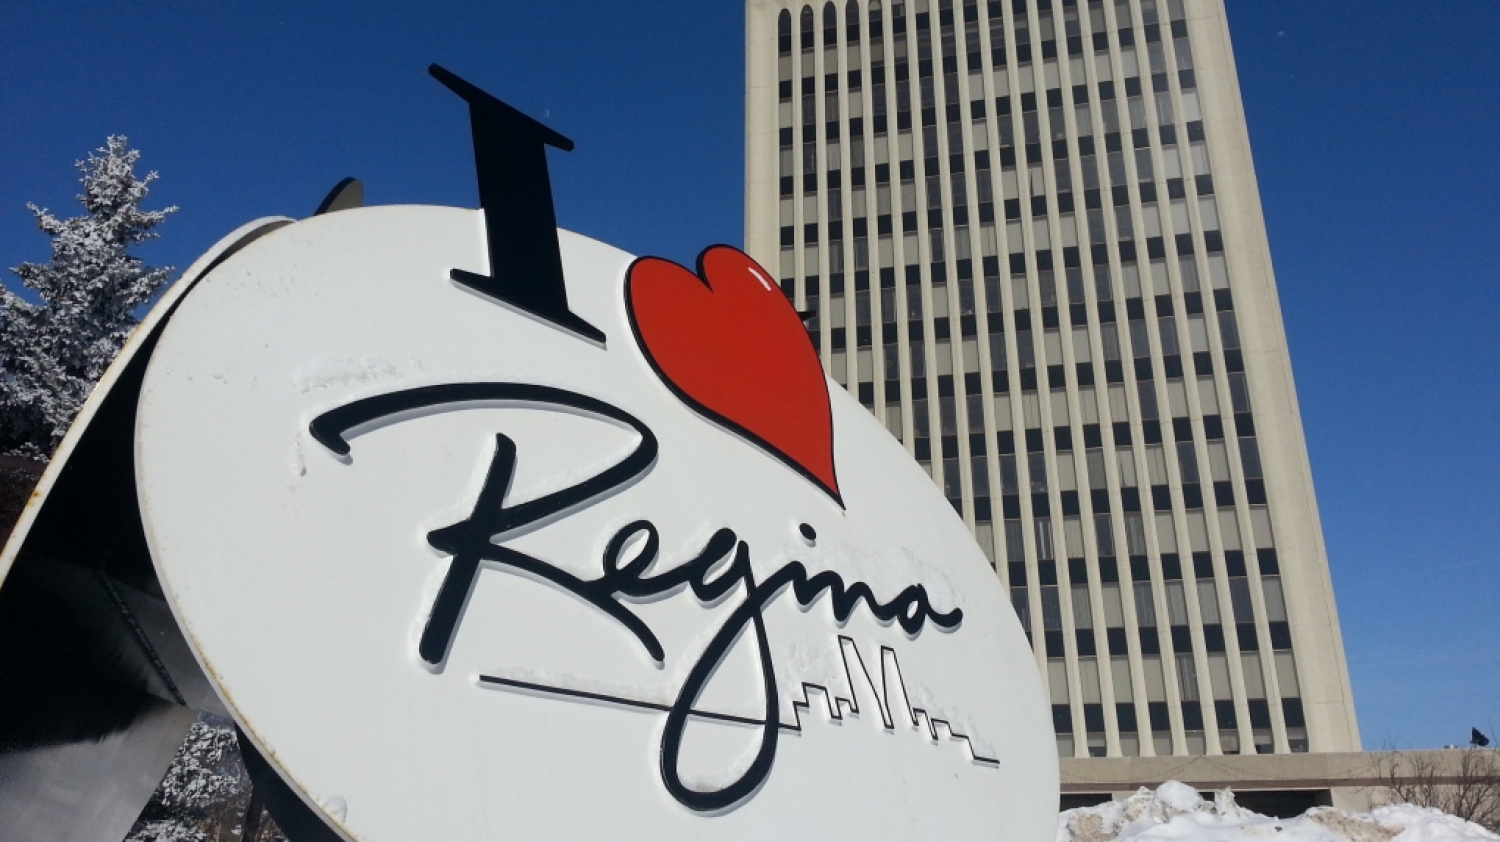 All Non-essential businesses in Regina MUST close! So we're going to shut down for a bit too. 